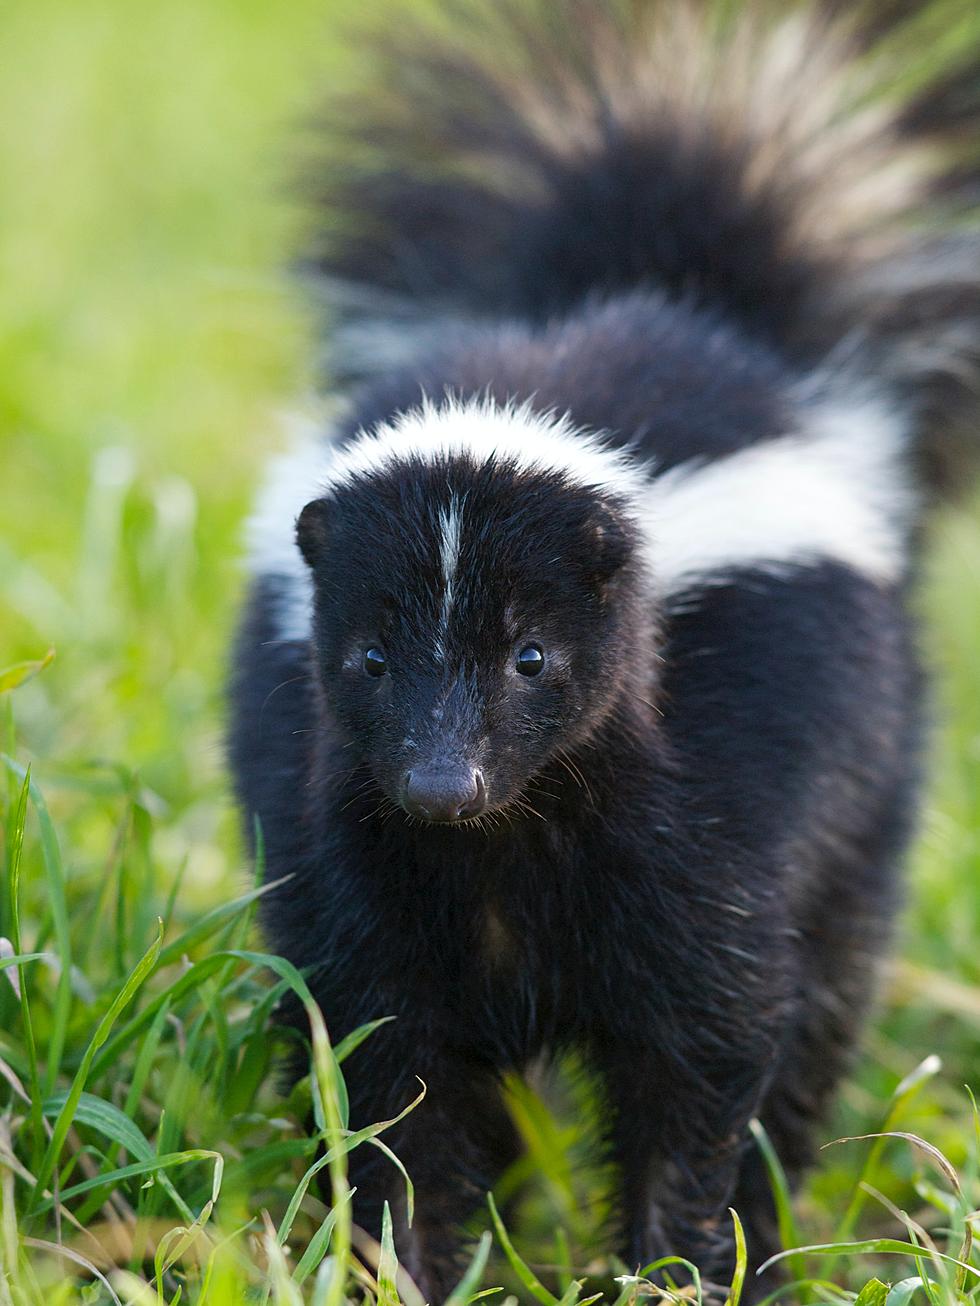 Upstate New York Man Killed While Trying To Get Rid Of A Skunk